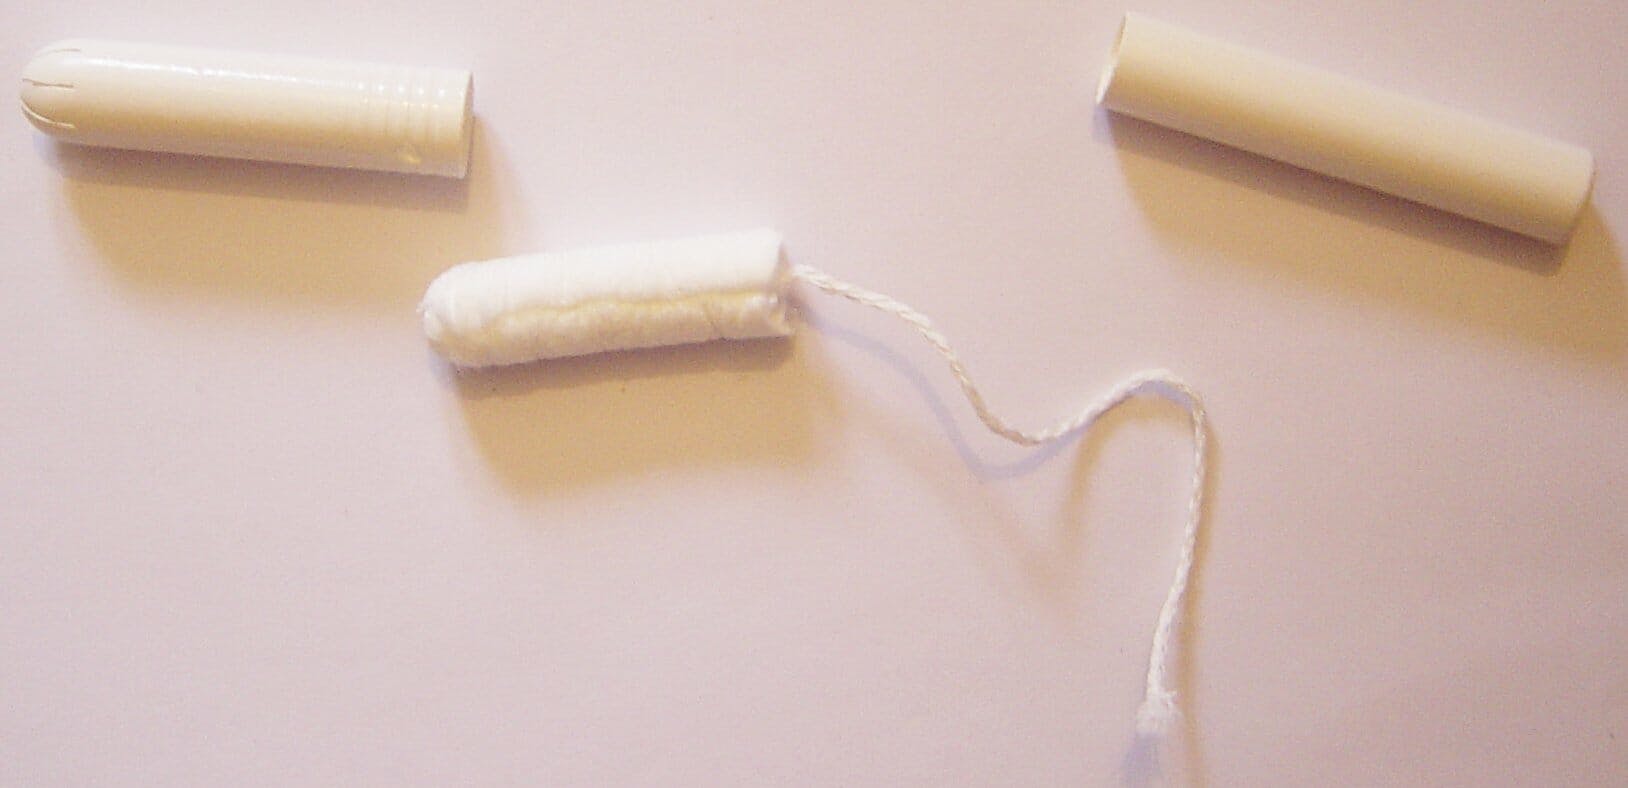 Toxic Shock Syndrome Is Rare. Here's What Tampon Users Should Know.